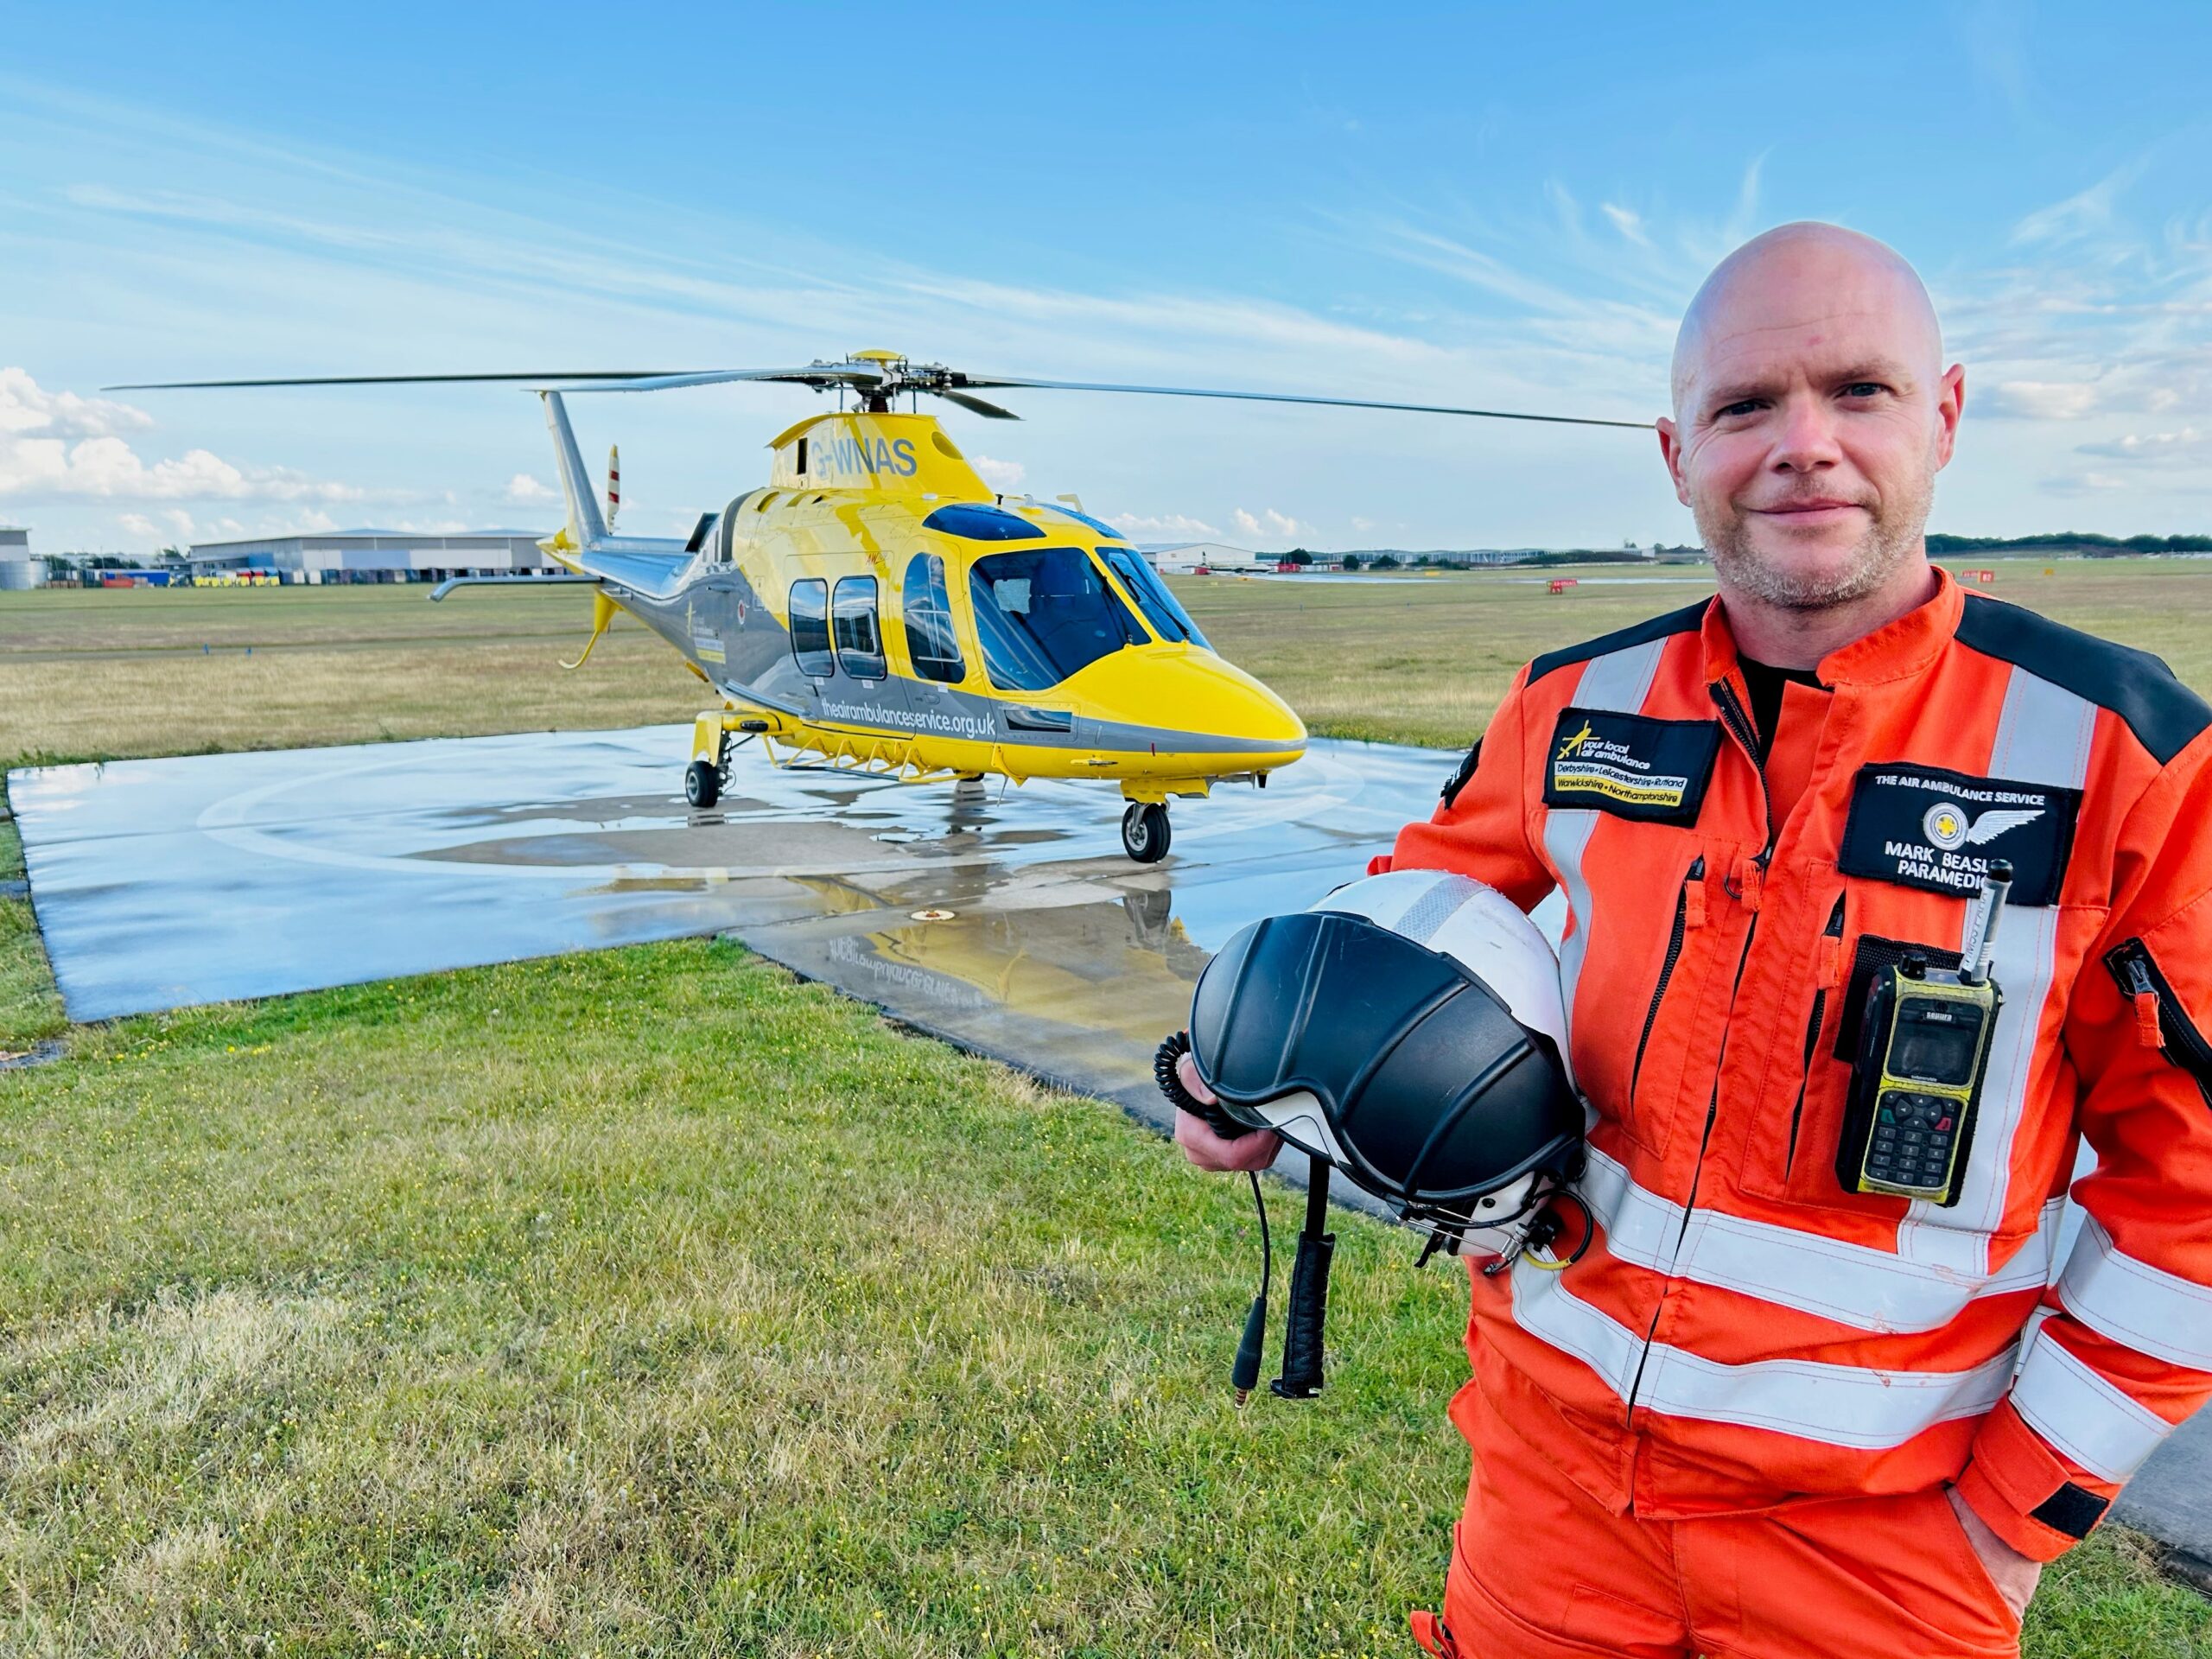 Mark Beasley, Critical Care Paramedic, stood in front of a HEMS helicopter.